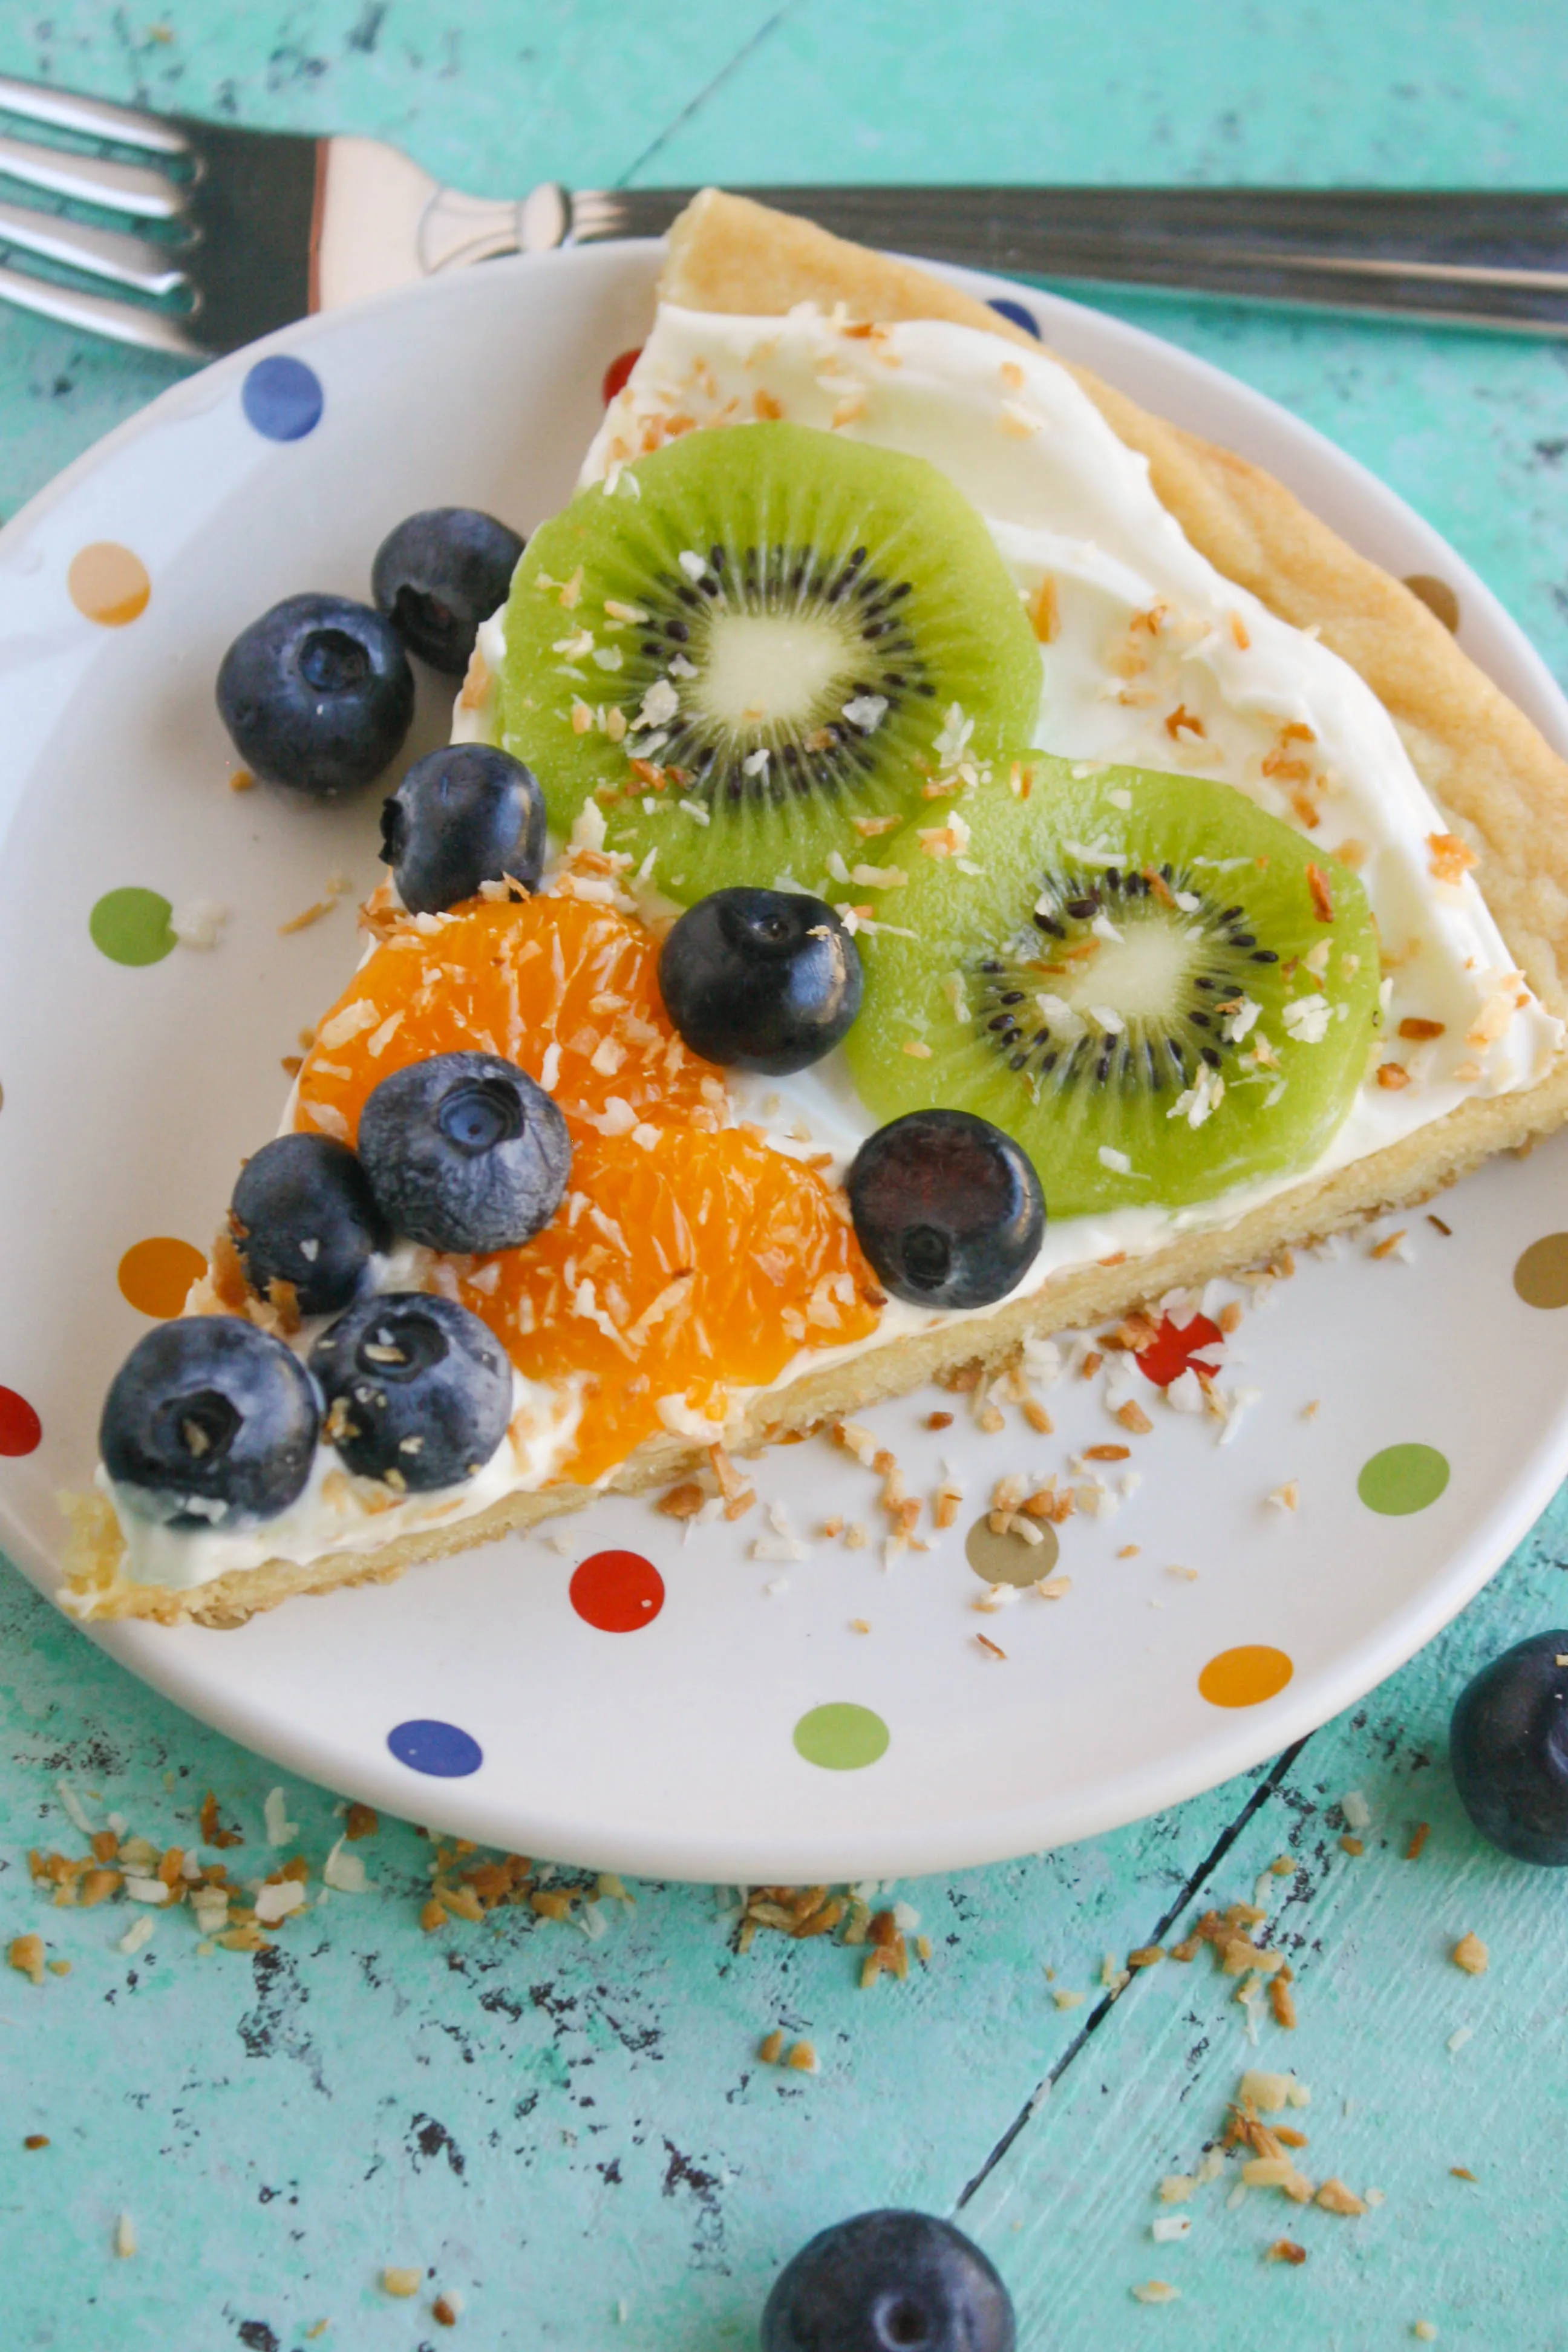 Sugar Cookie Fruit Pizza is ther perfect summer party treat! Make one for your next get together for an easy-to-make dessert!